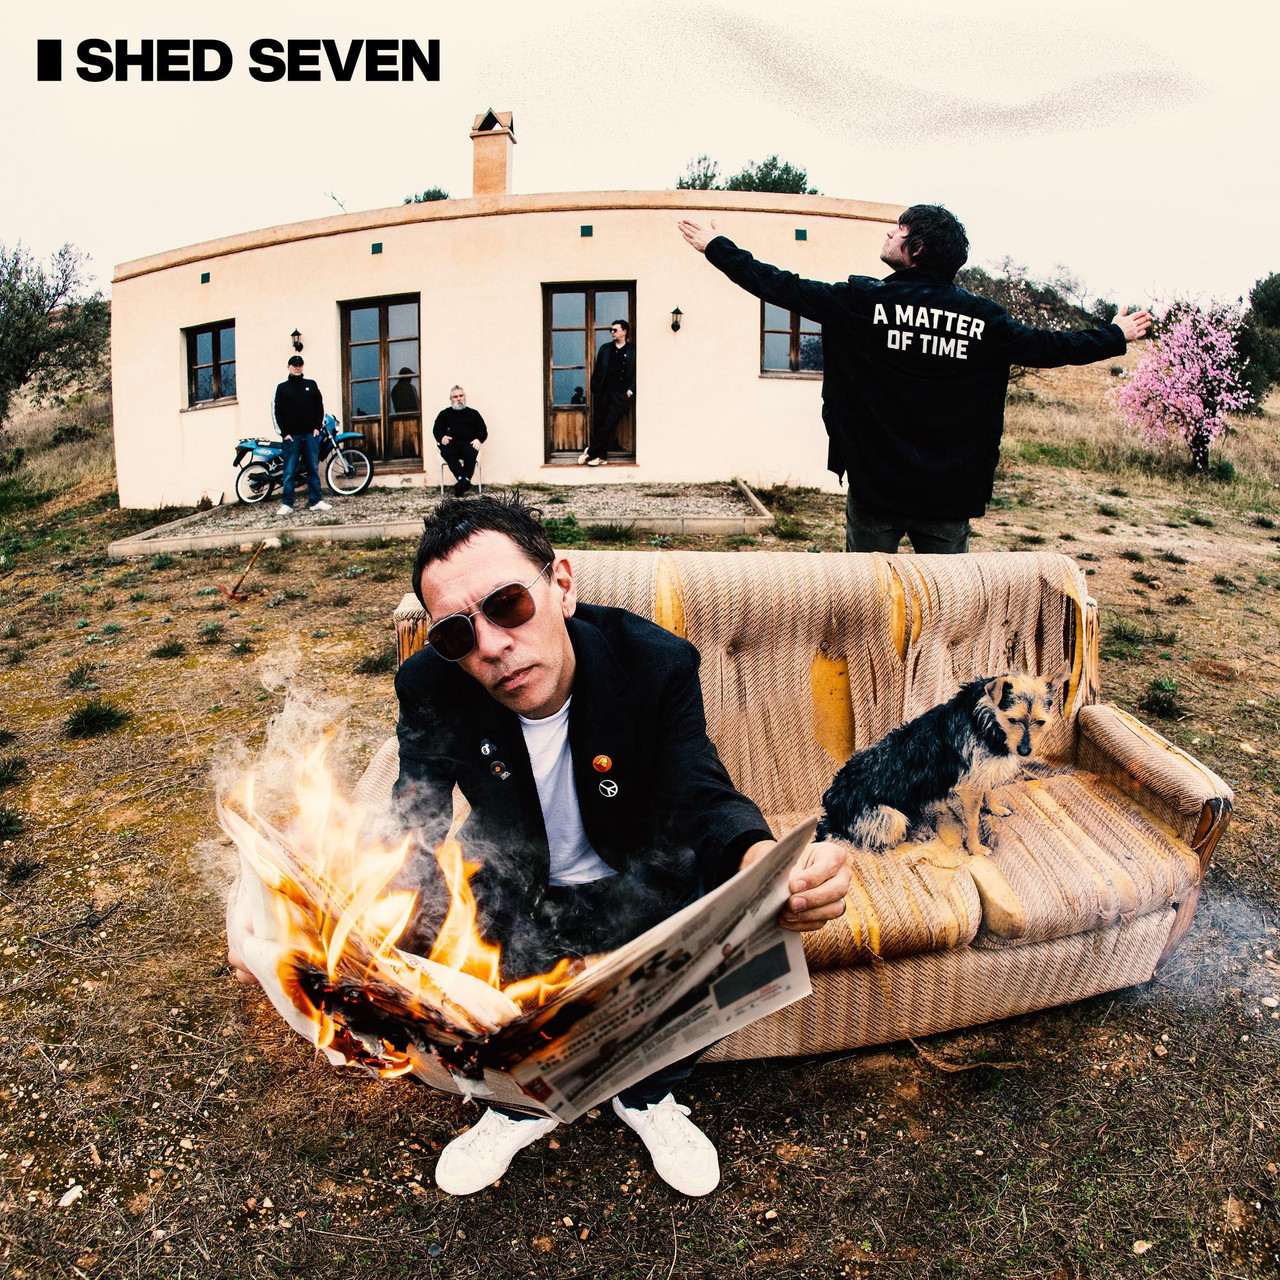 A Matter of Time by Shed Seven